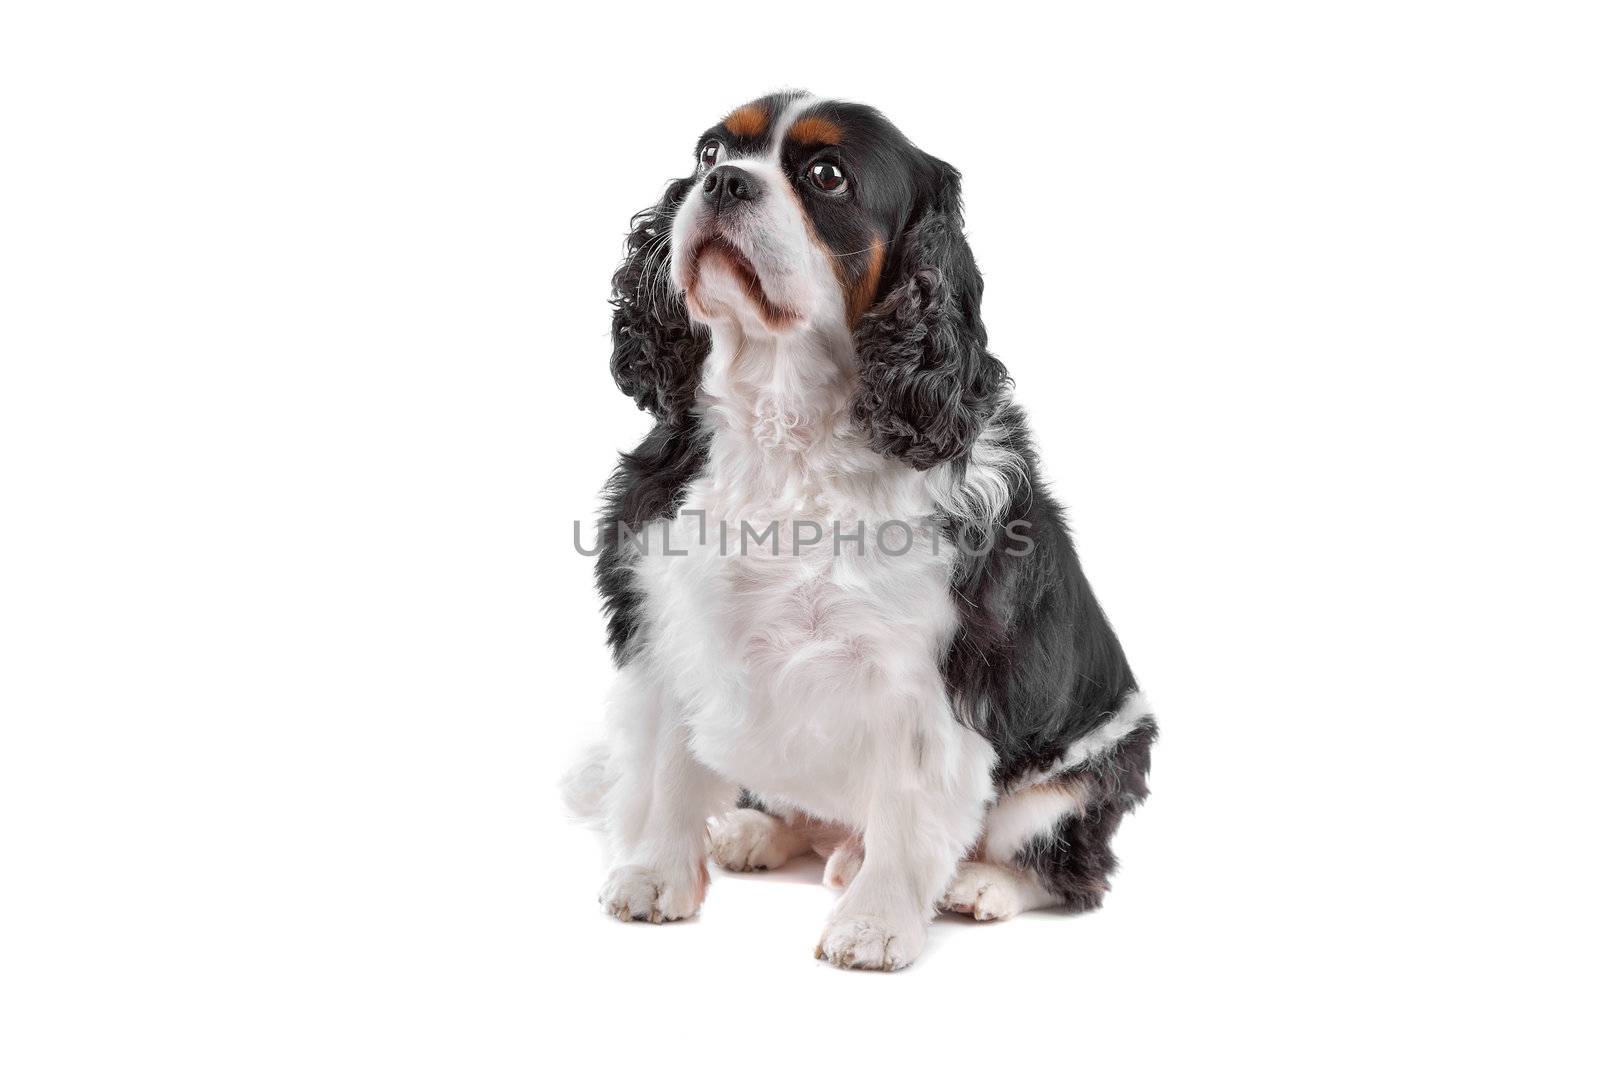 Cute Cavalier King Charles Spaniel dog sitting, on a white background